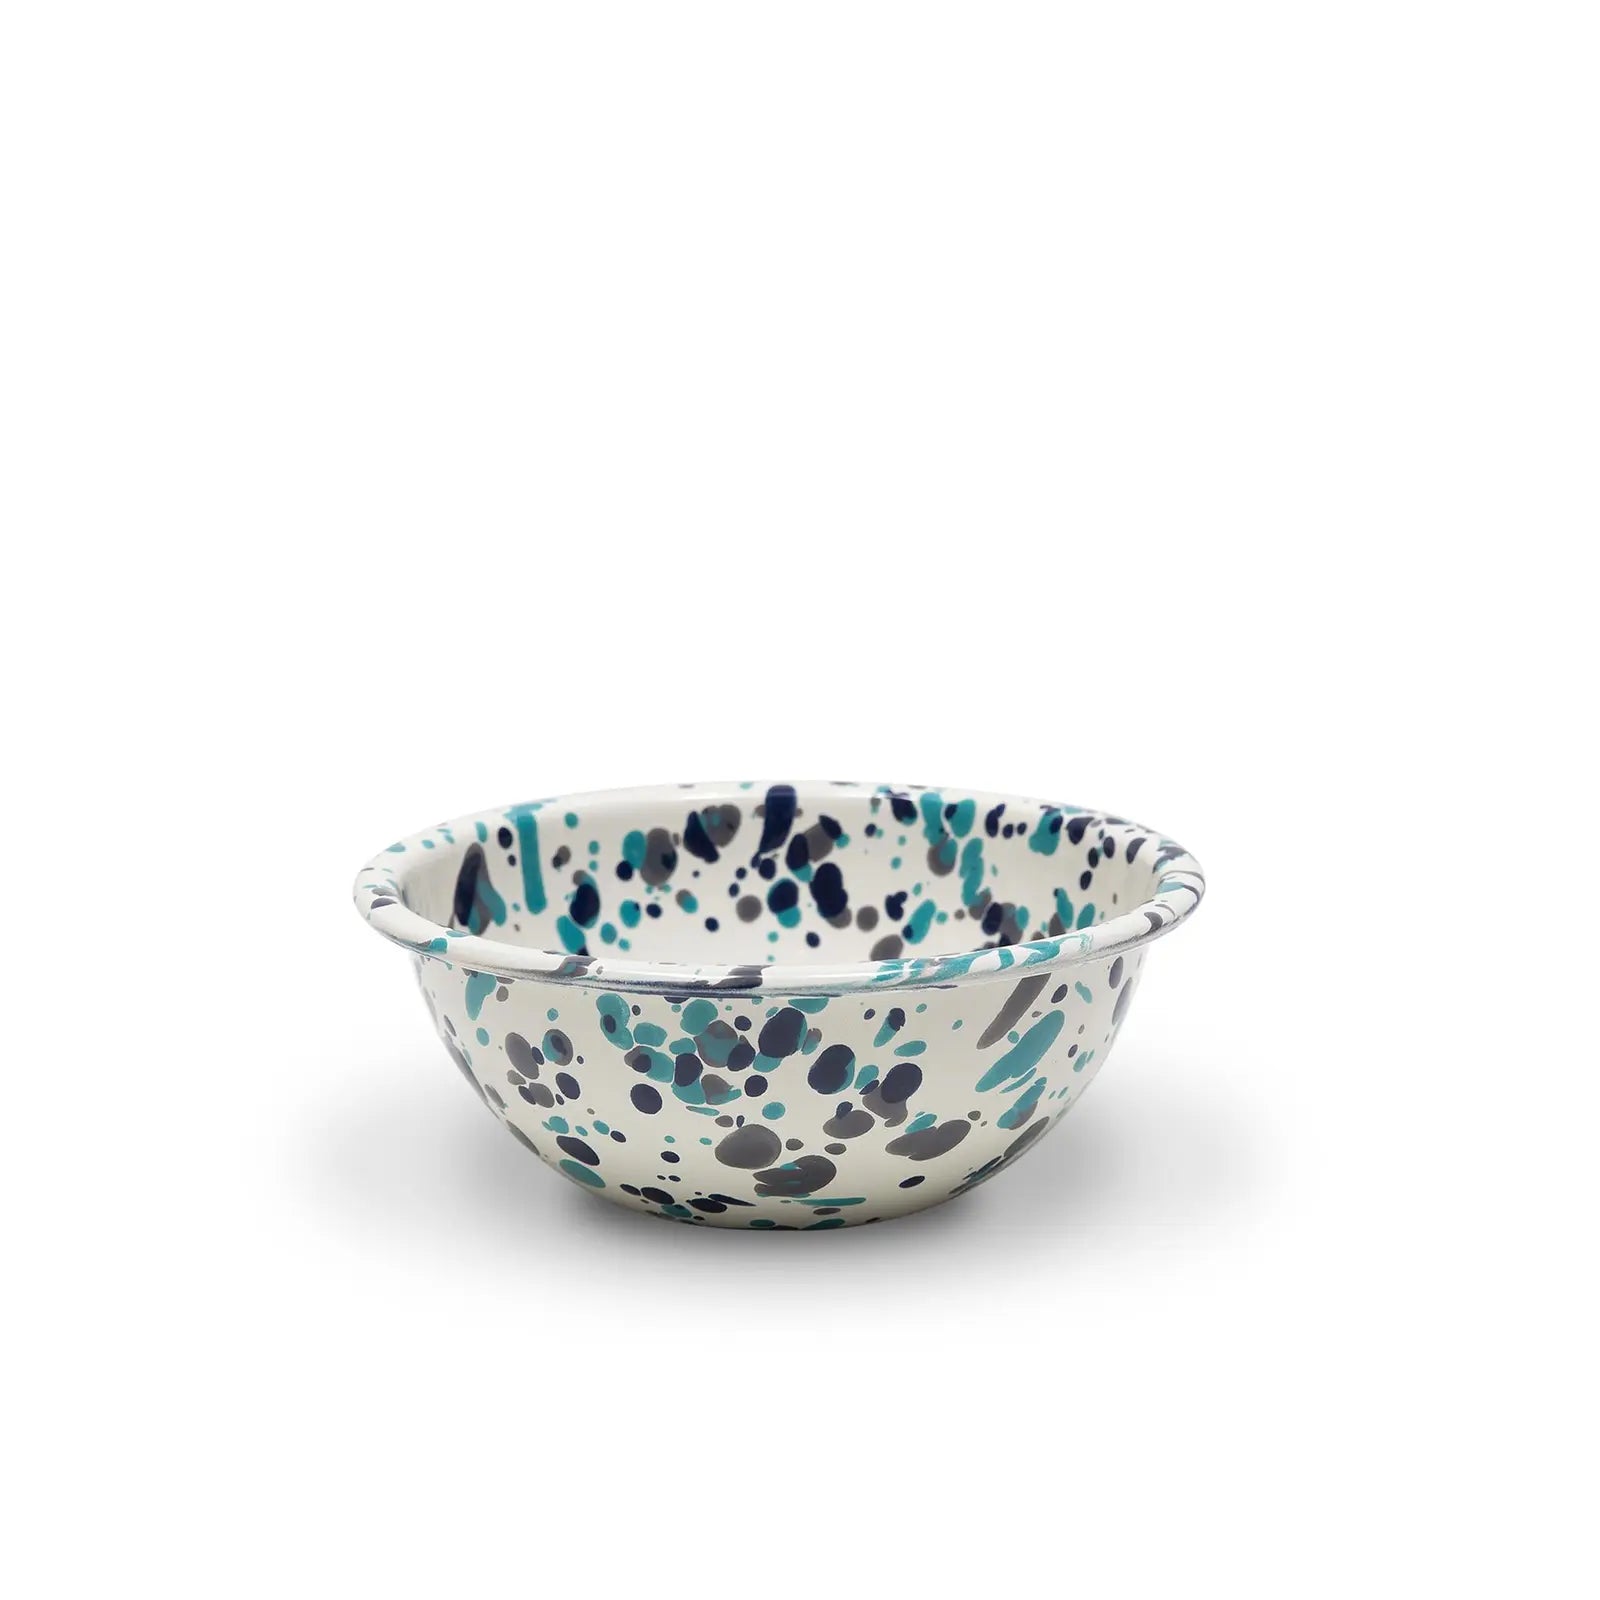 Crow Canyon - The Get Out Enamel Cereal Bowl, Tomato & Smoke Blue